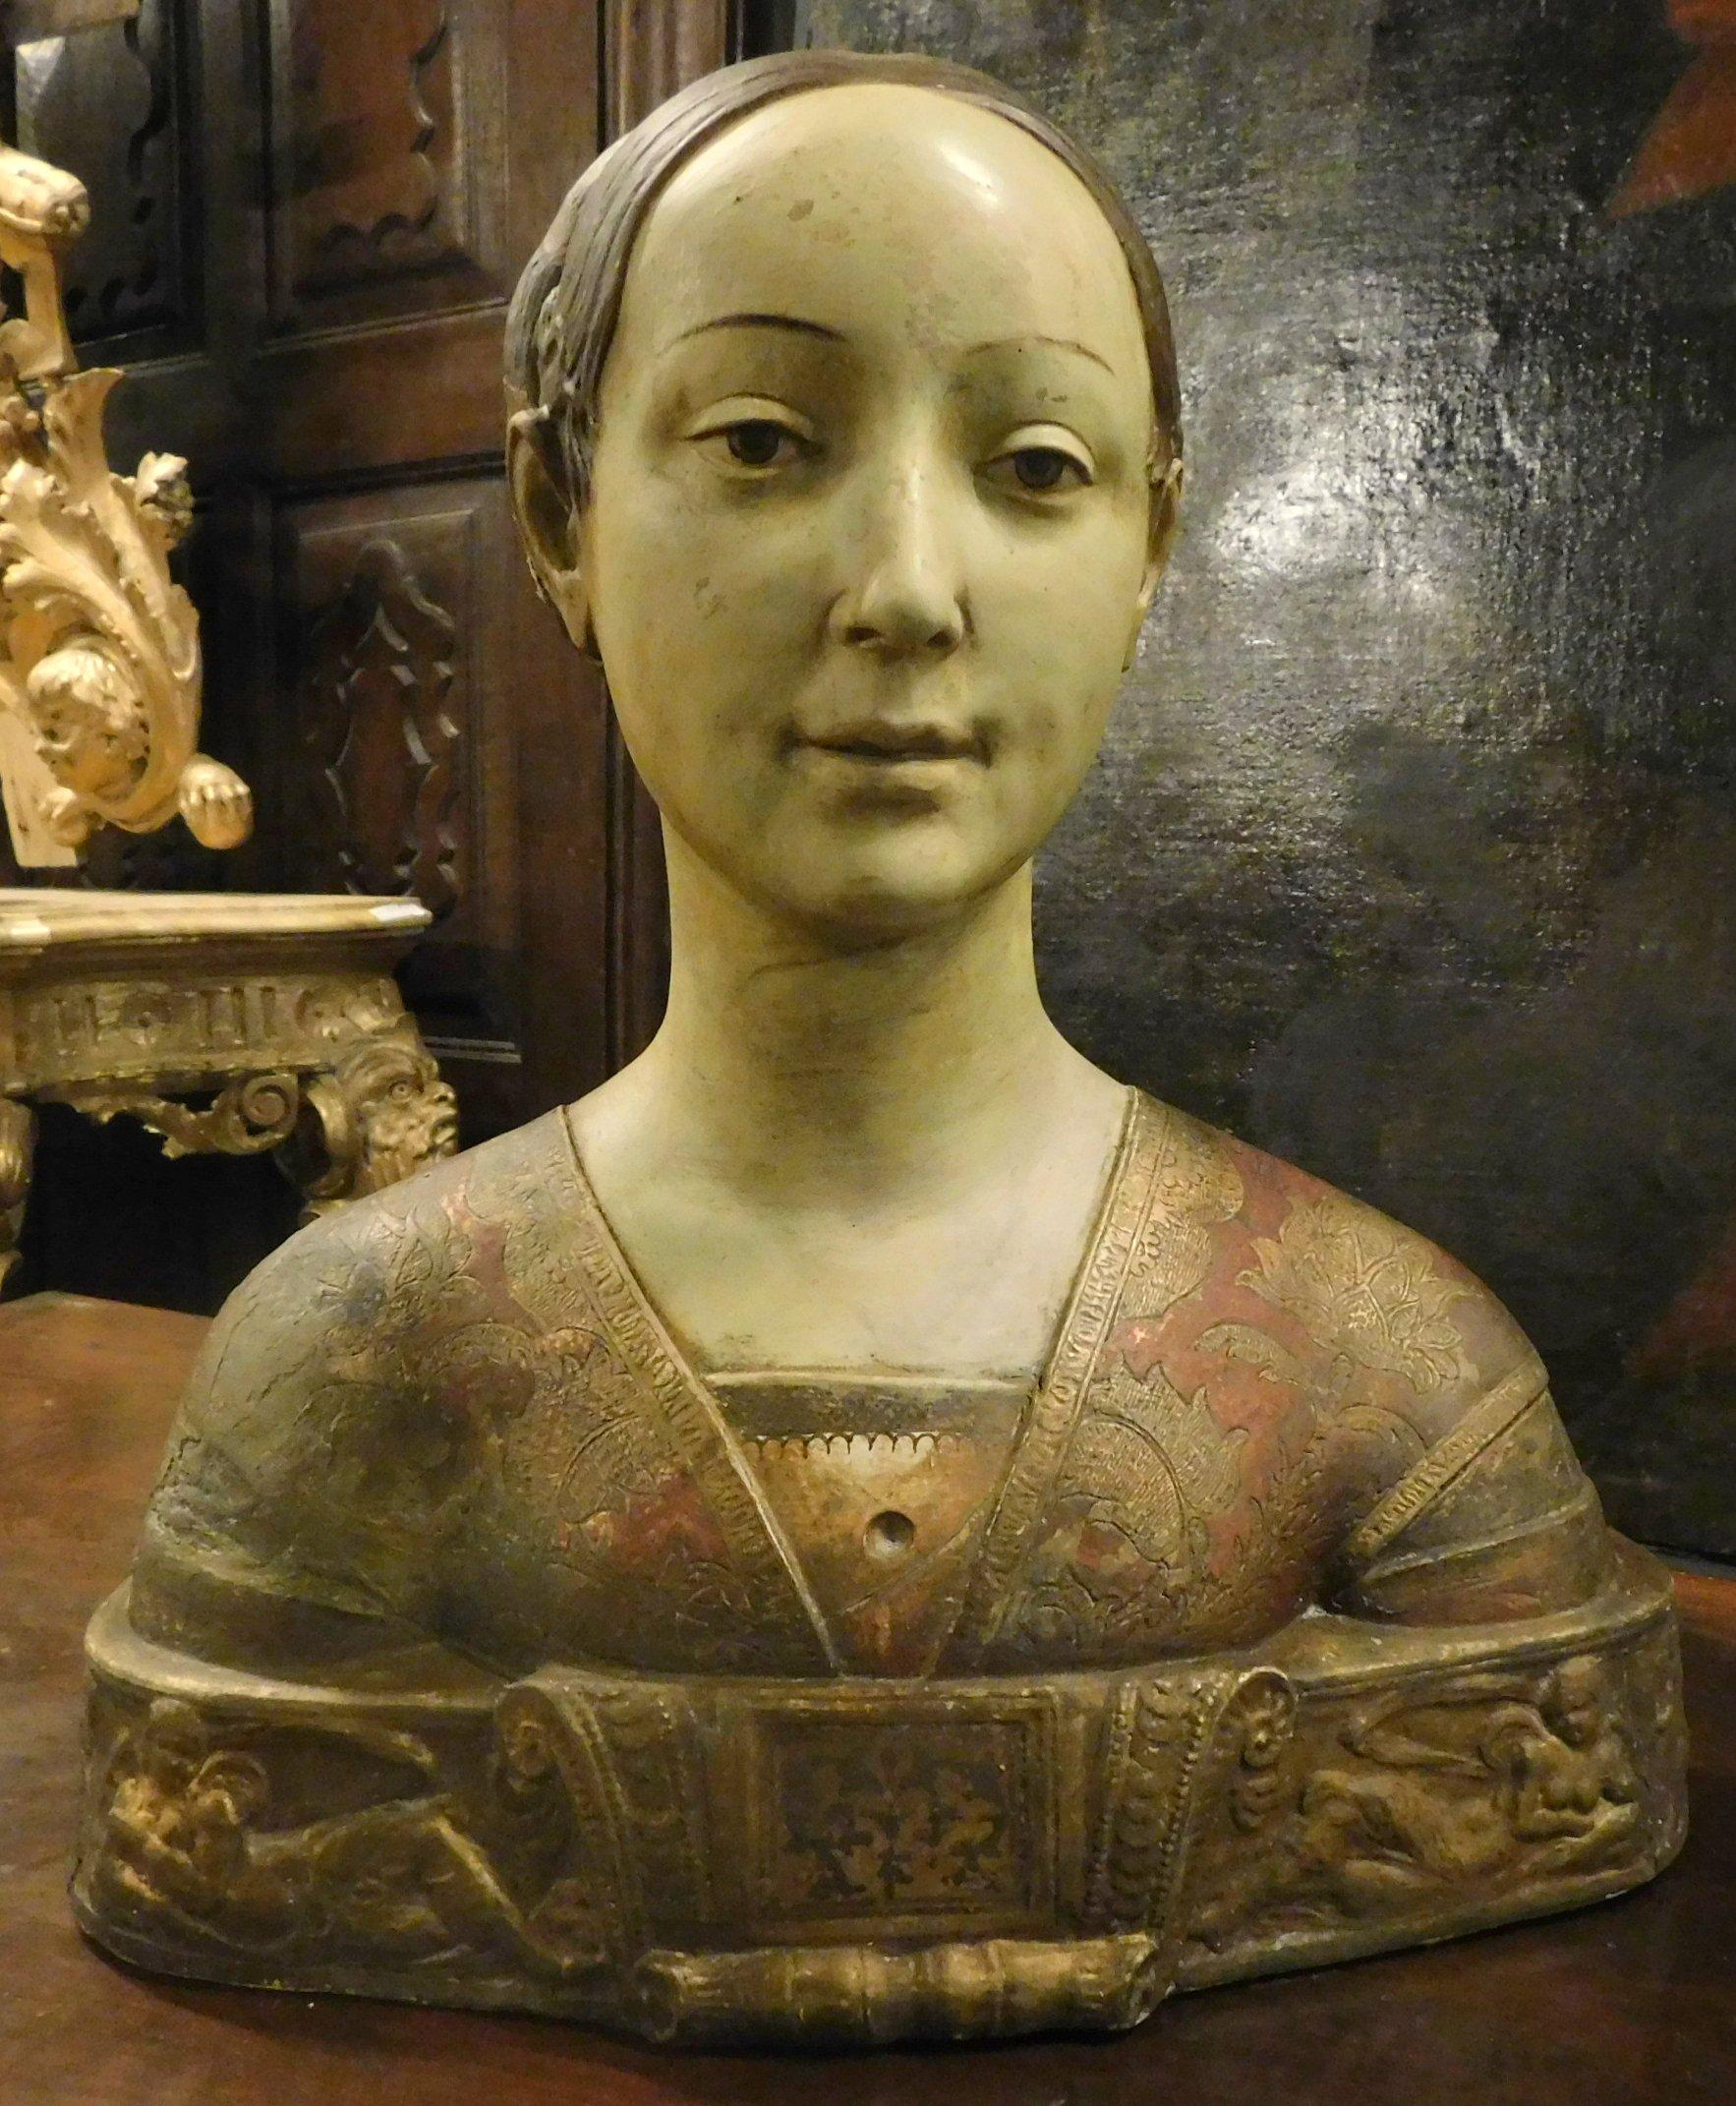 Antique bust of a Florentine noblewoman in hand-glazed and hand-sculpted terracotta, sculpture statue depicting a precious half-length, from the 19th century, measuring cm length 45 x height 47, depth 18 cm.
Coming from the noble house of Florence